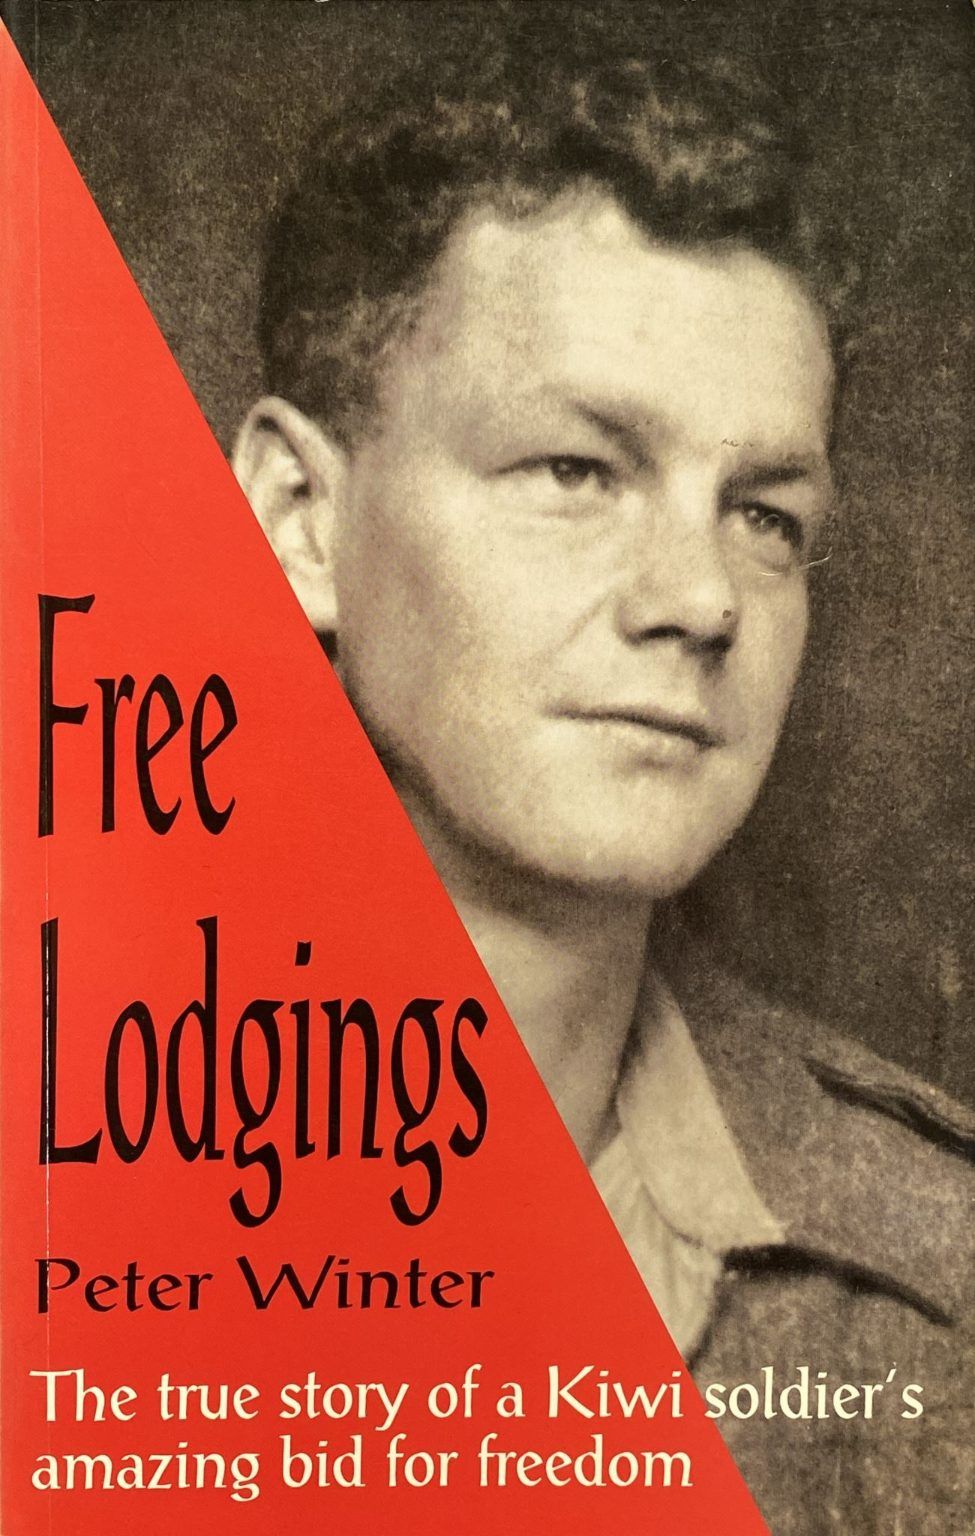 FREE LODGINGS: The true story of a Kiwi soldier's amazing bid for freedom